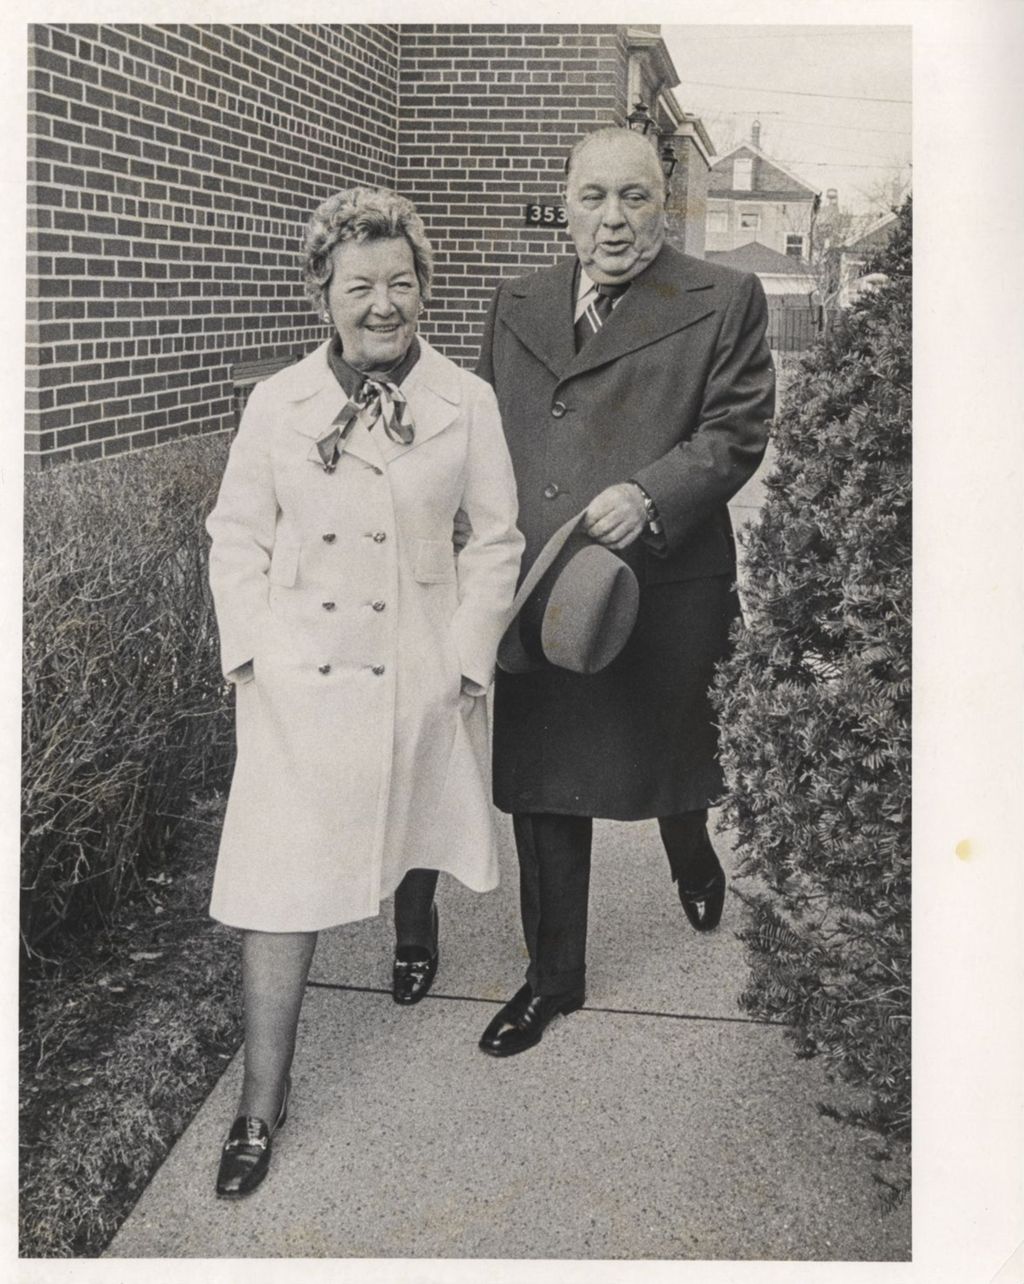 Miniature of Richard J. and Eleanor Daley on the walkway outside their home